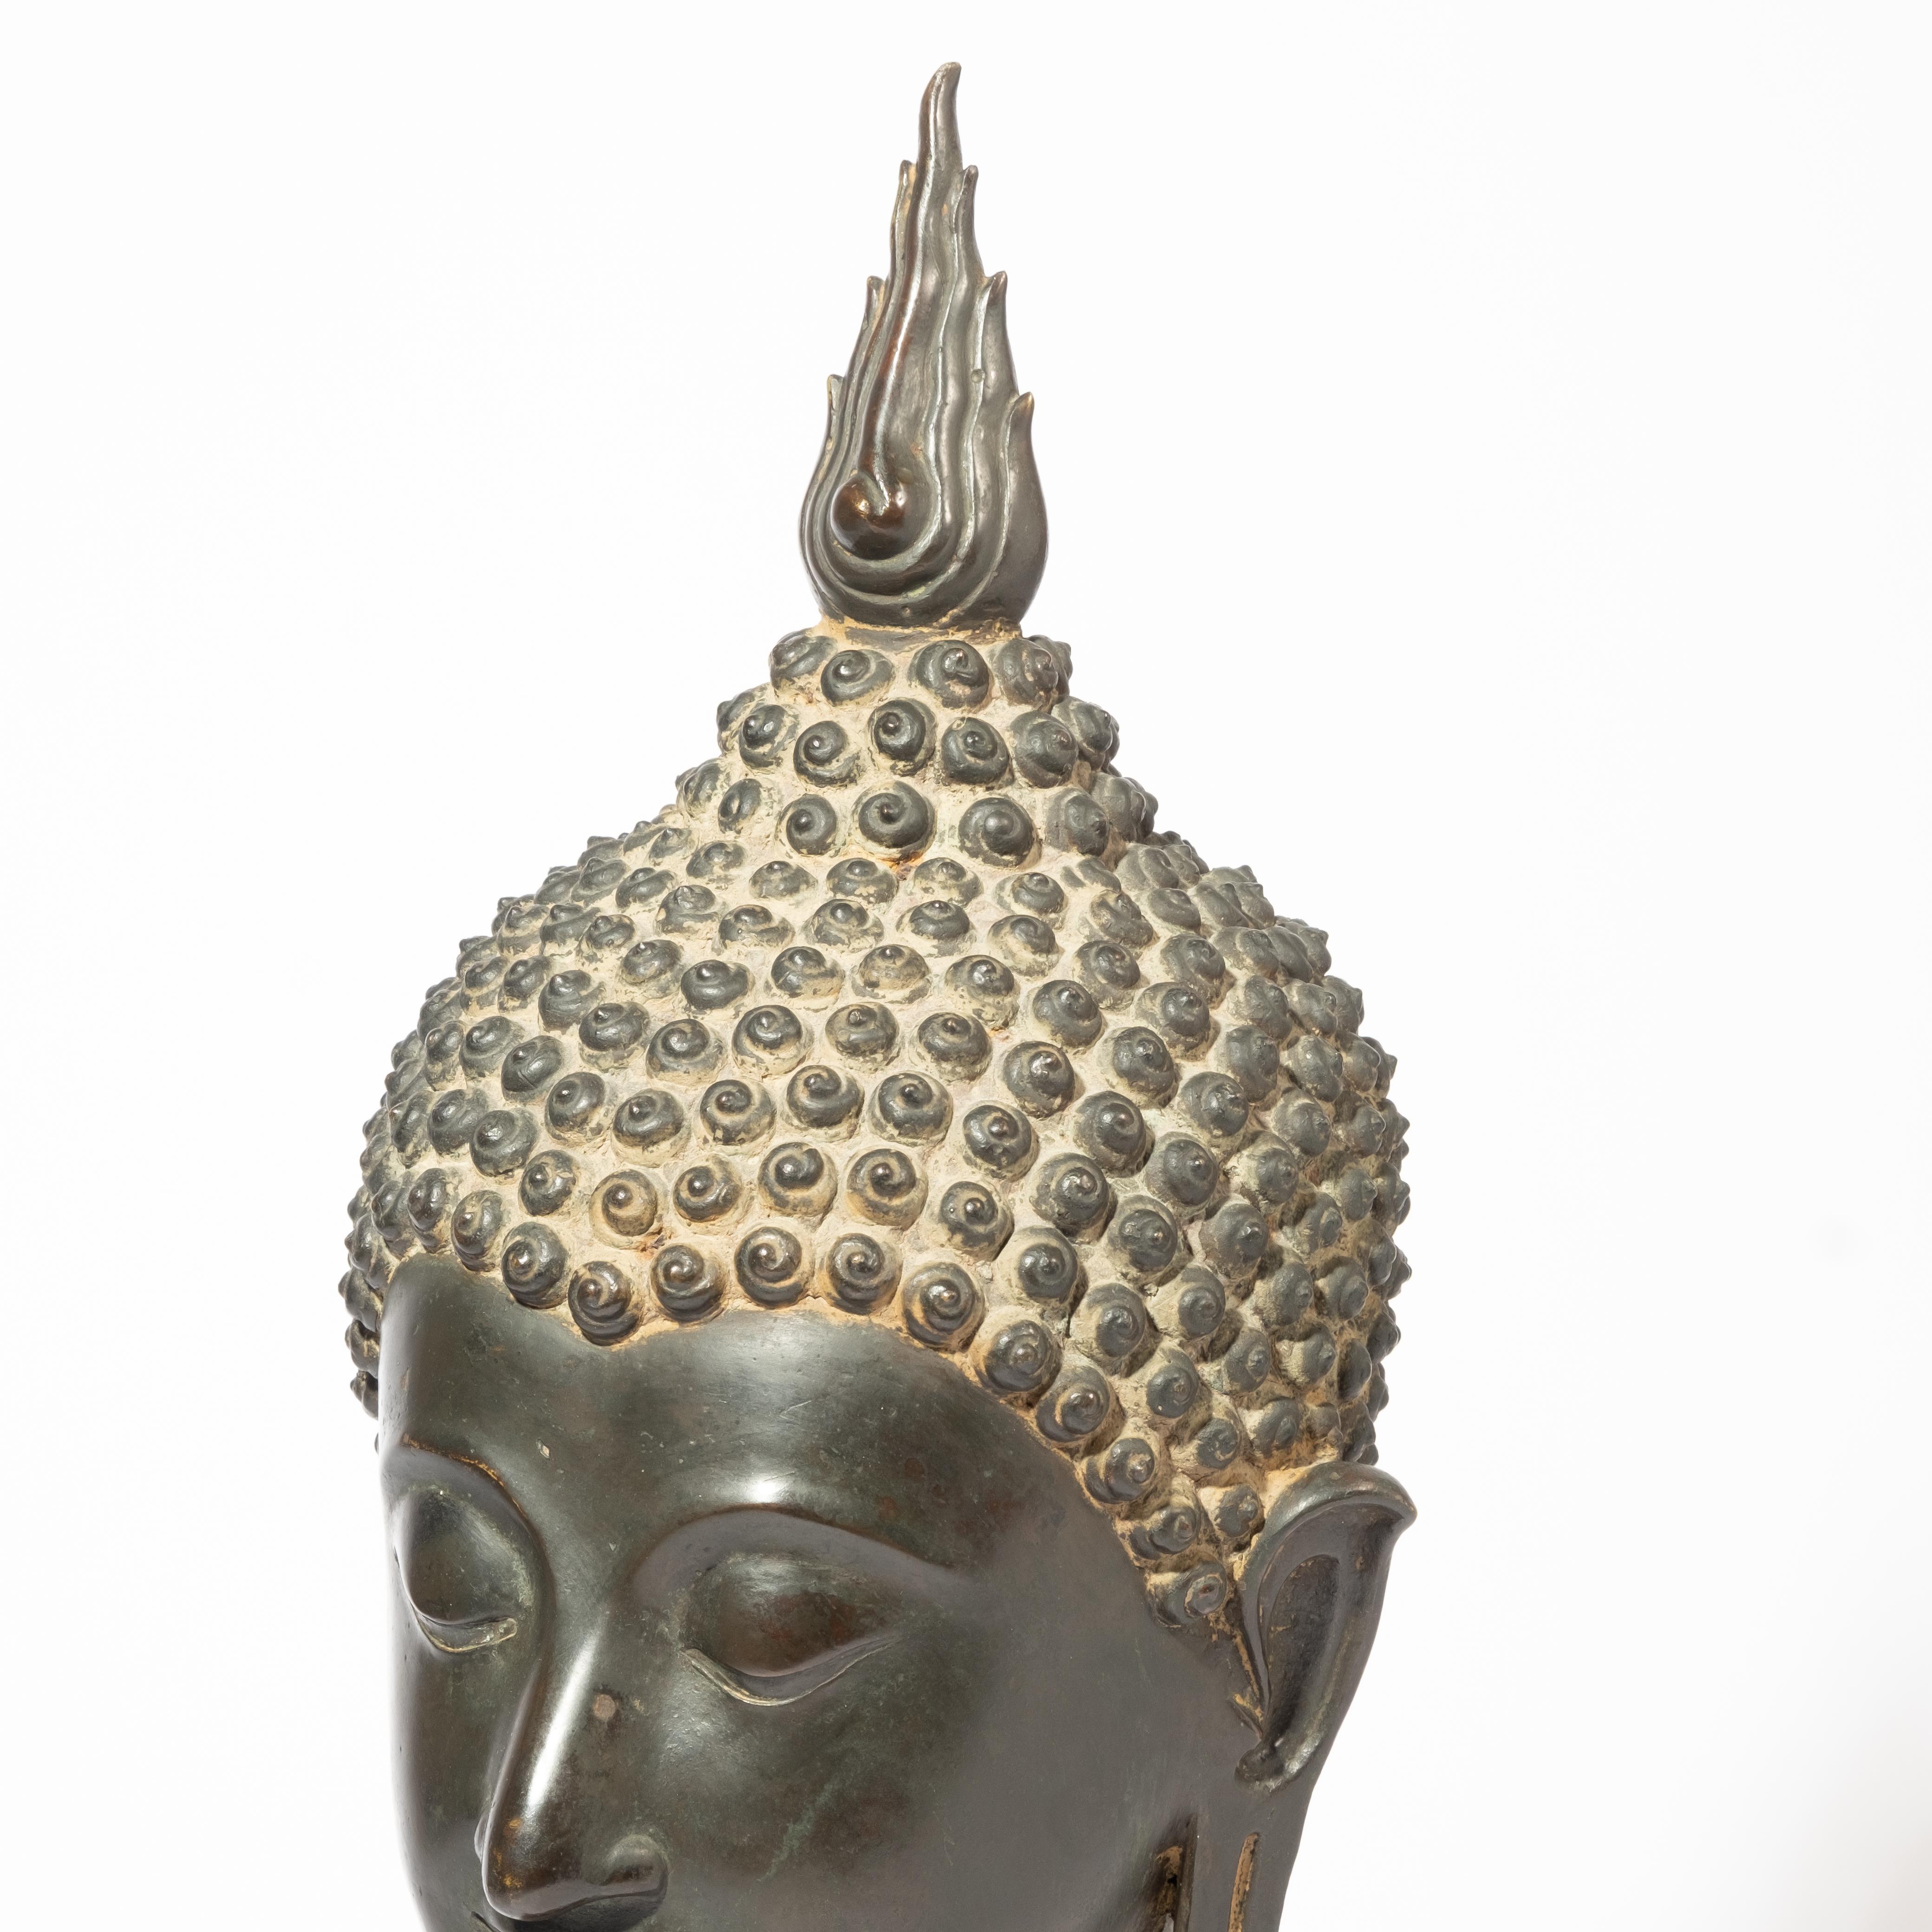 Large Ancient Sukhothai Bronze Buddha Head. Excellent Example likely 15th c., Probably Thailand, in classic Sukhothai style, with serene expression, downcast eyes and flame of enlightenment on top of ushnisha, egg-shaped head, tight curls arched